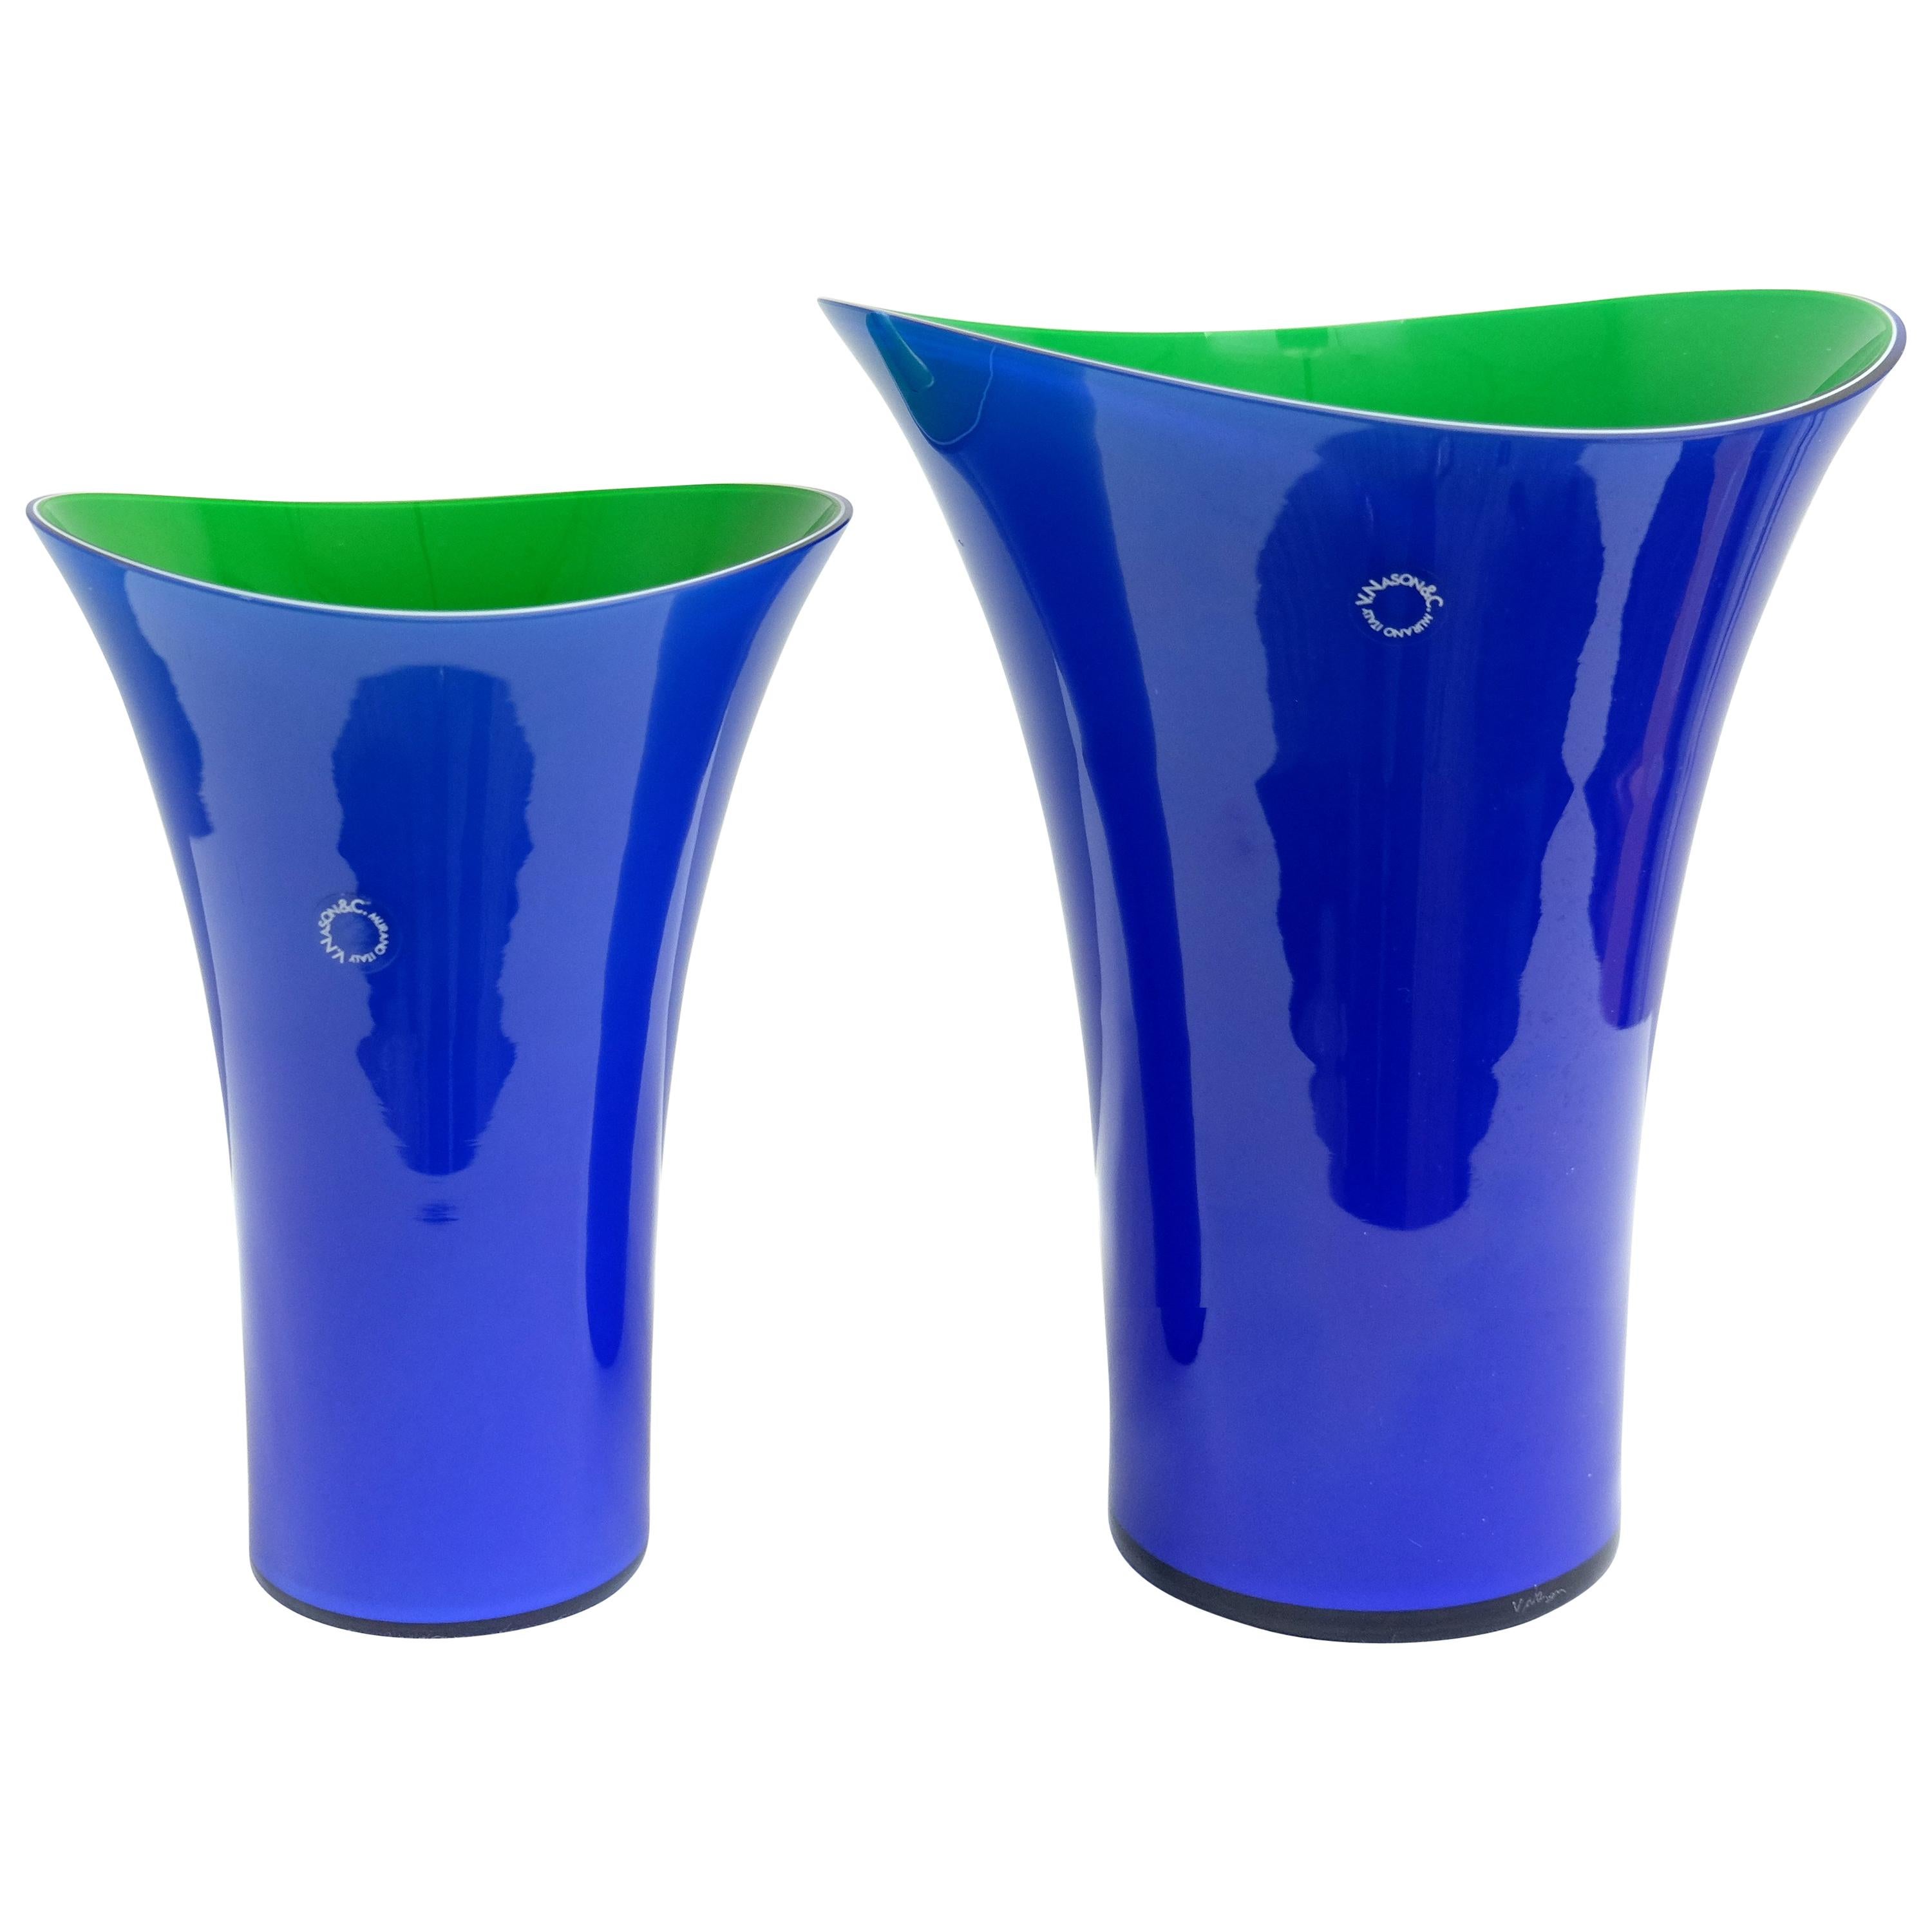 Murano Glass Vase Set by V. Nason & C. Italy, Blue and Green Asymmetric Vases For Sale